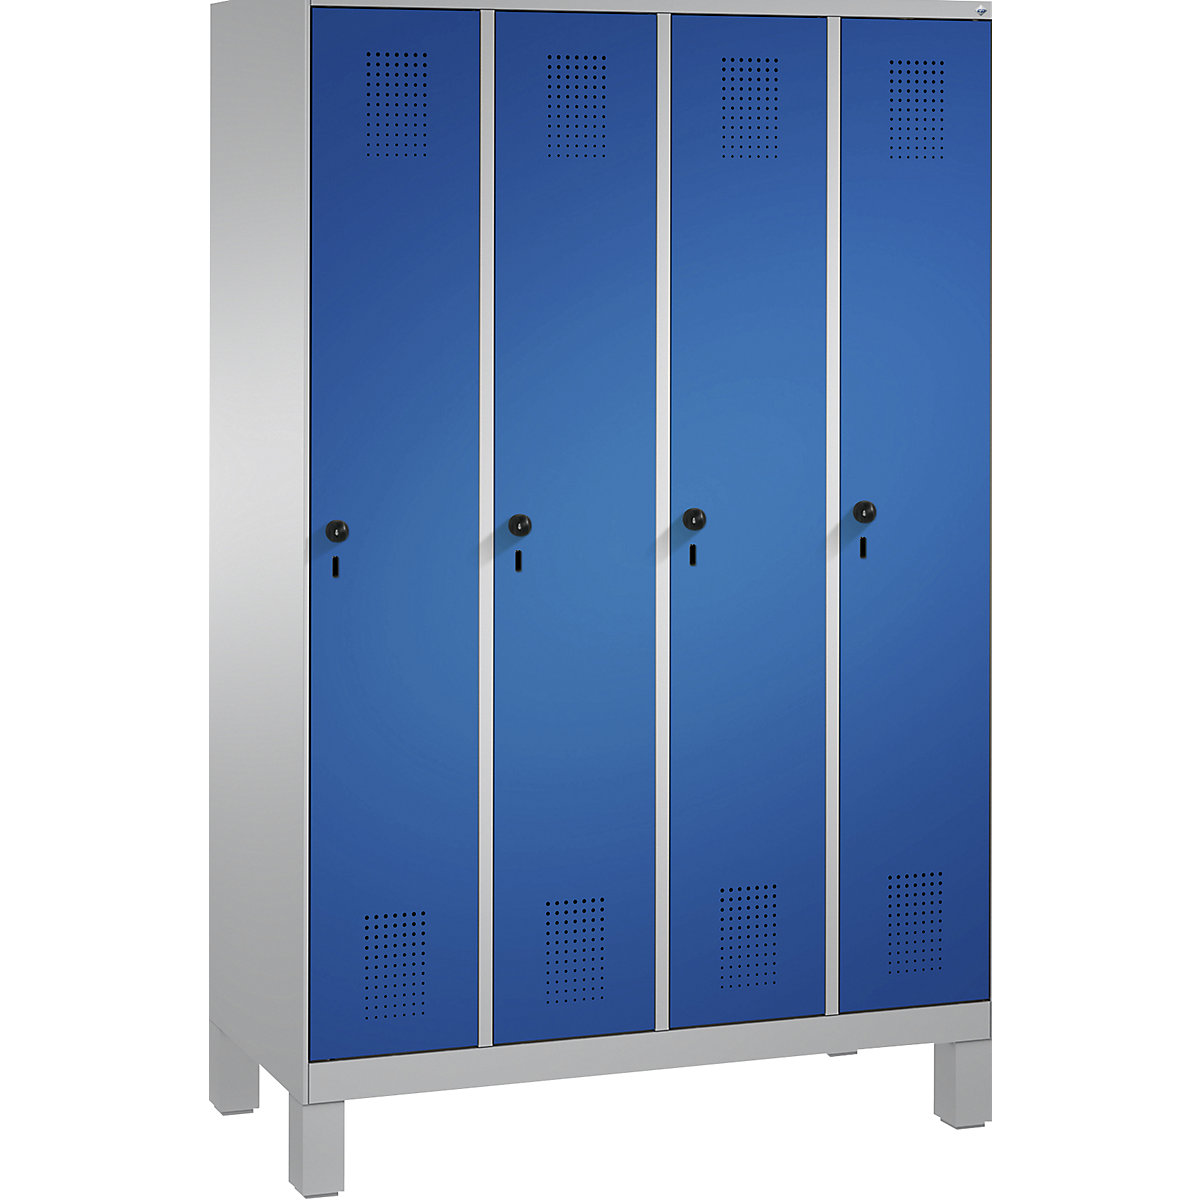 EVOLO cloakroom locker, with feet – C+P, 4 compartments, compartment width 300 mm, white aluminium / gentian blue-7